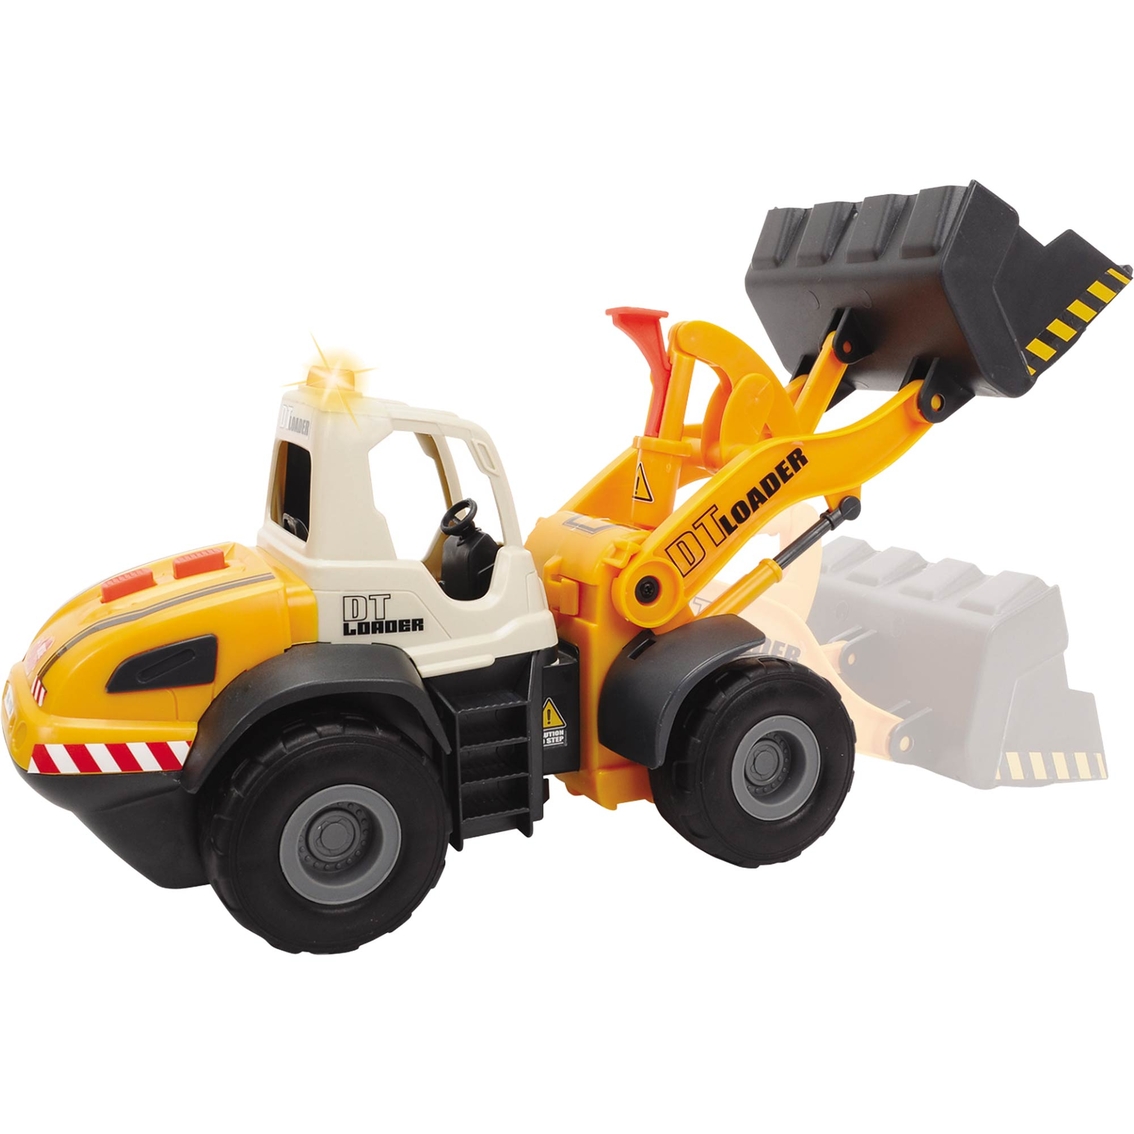 Dickie Toys Light and Sound Construction Front Loader Vehicle - Image 2 of 4